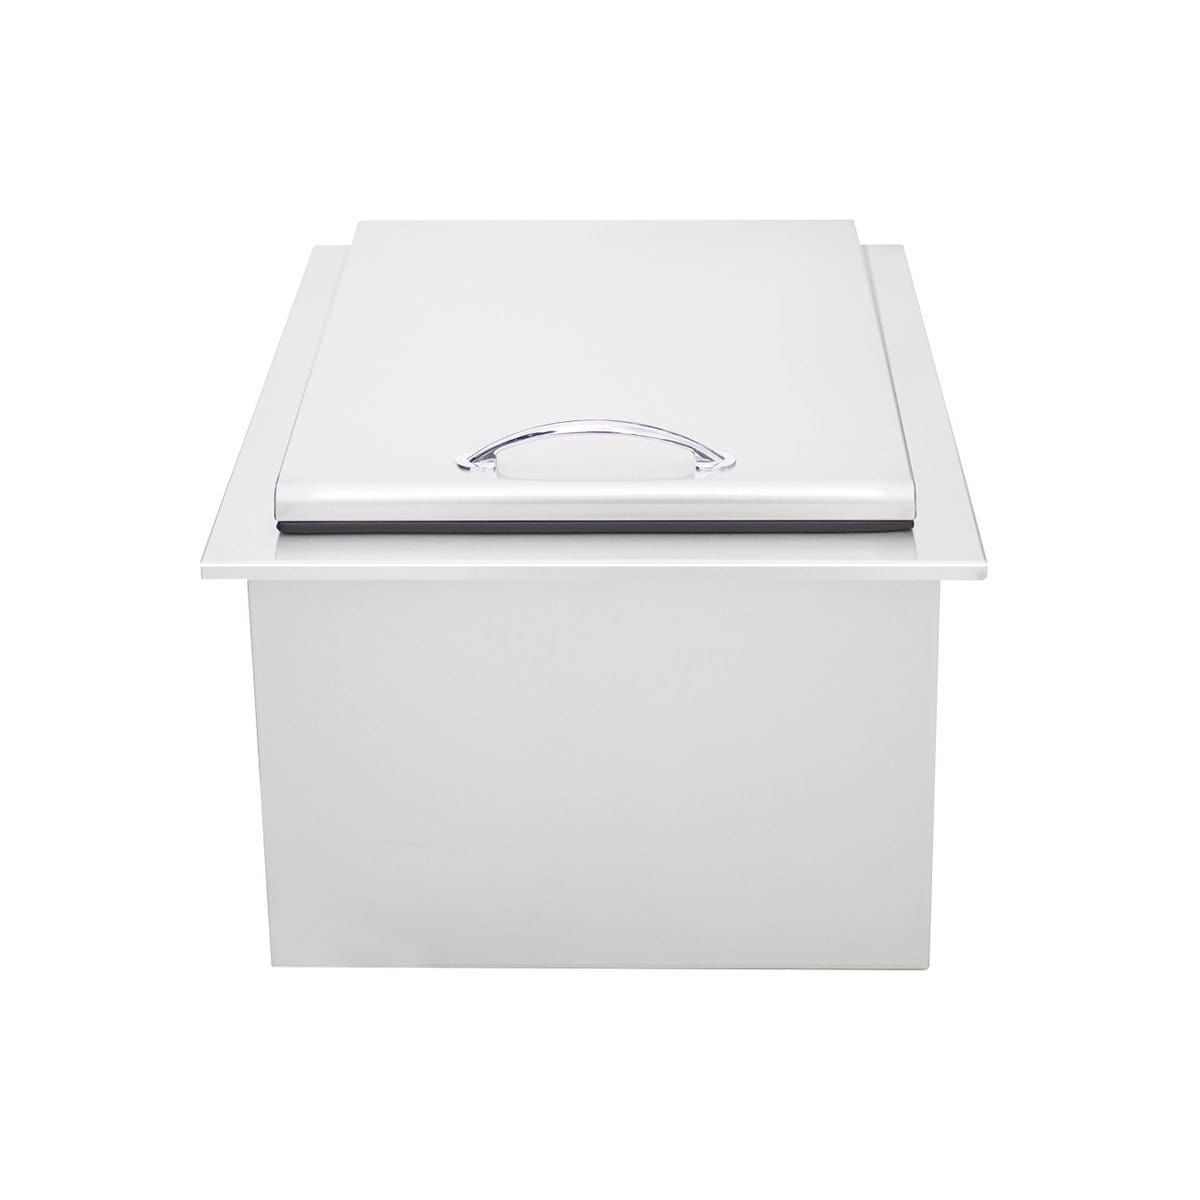 OutdoorKitchenPro Refrigeration + Cooling Summerset 17" 1.7C Drop-In Cooler SSIC-17